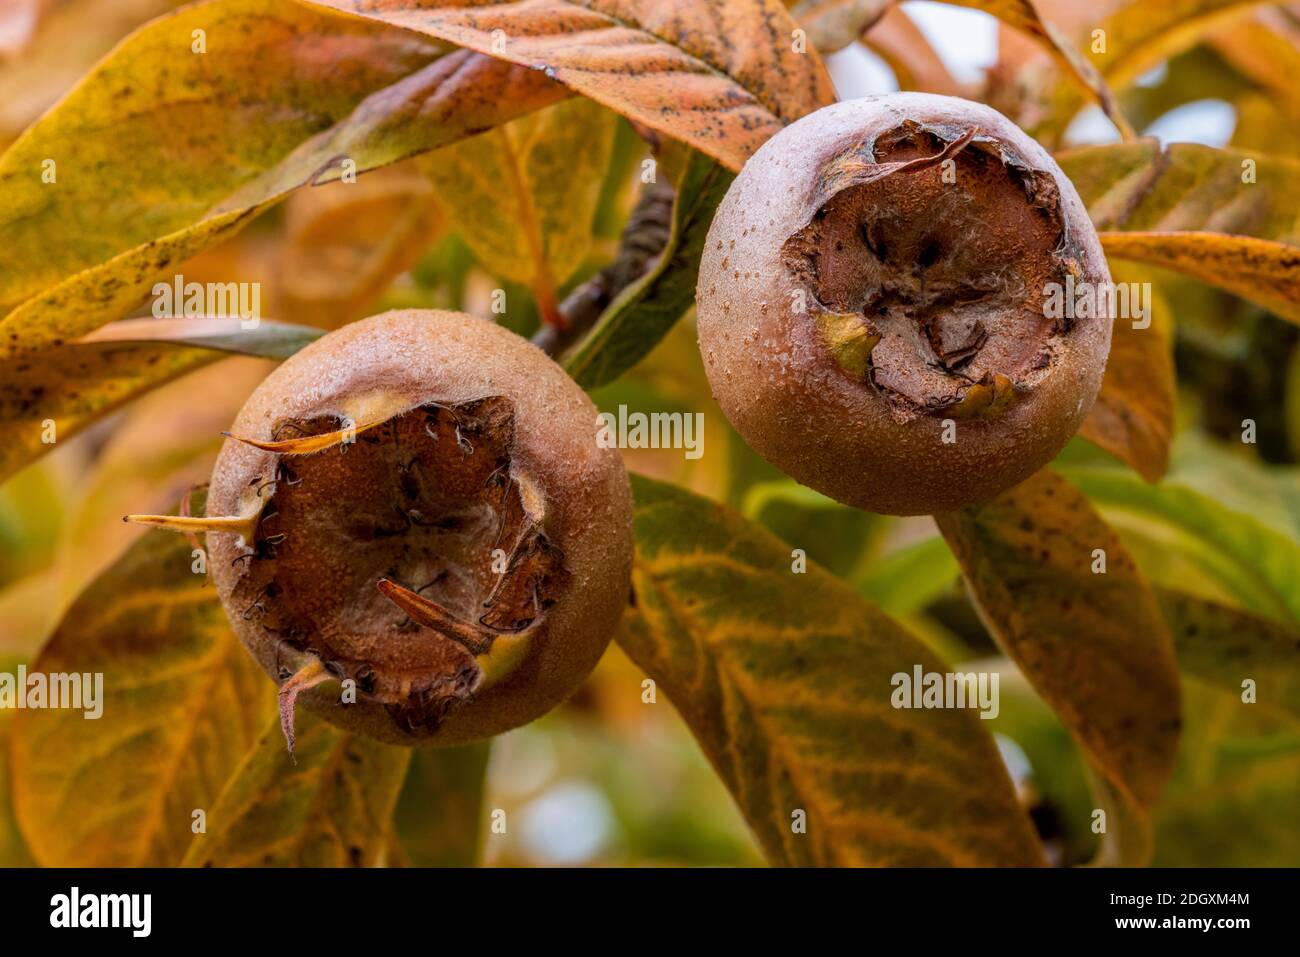 Close up of two organic golden brown ripe fruits of Medlar, Mespilus germanica, on tree in late autumn with green, yellow, brown autumnal leaves. Stock Photo